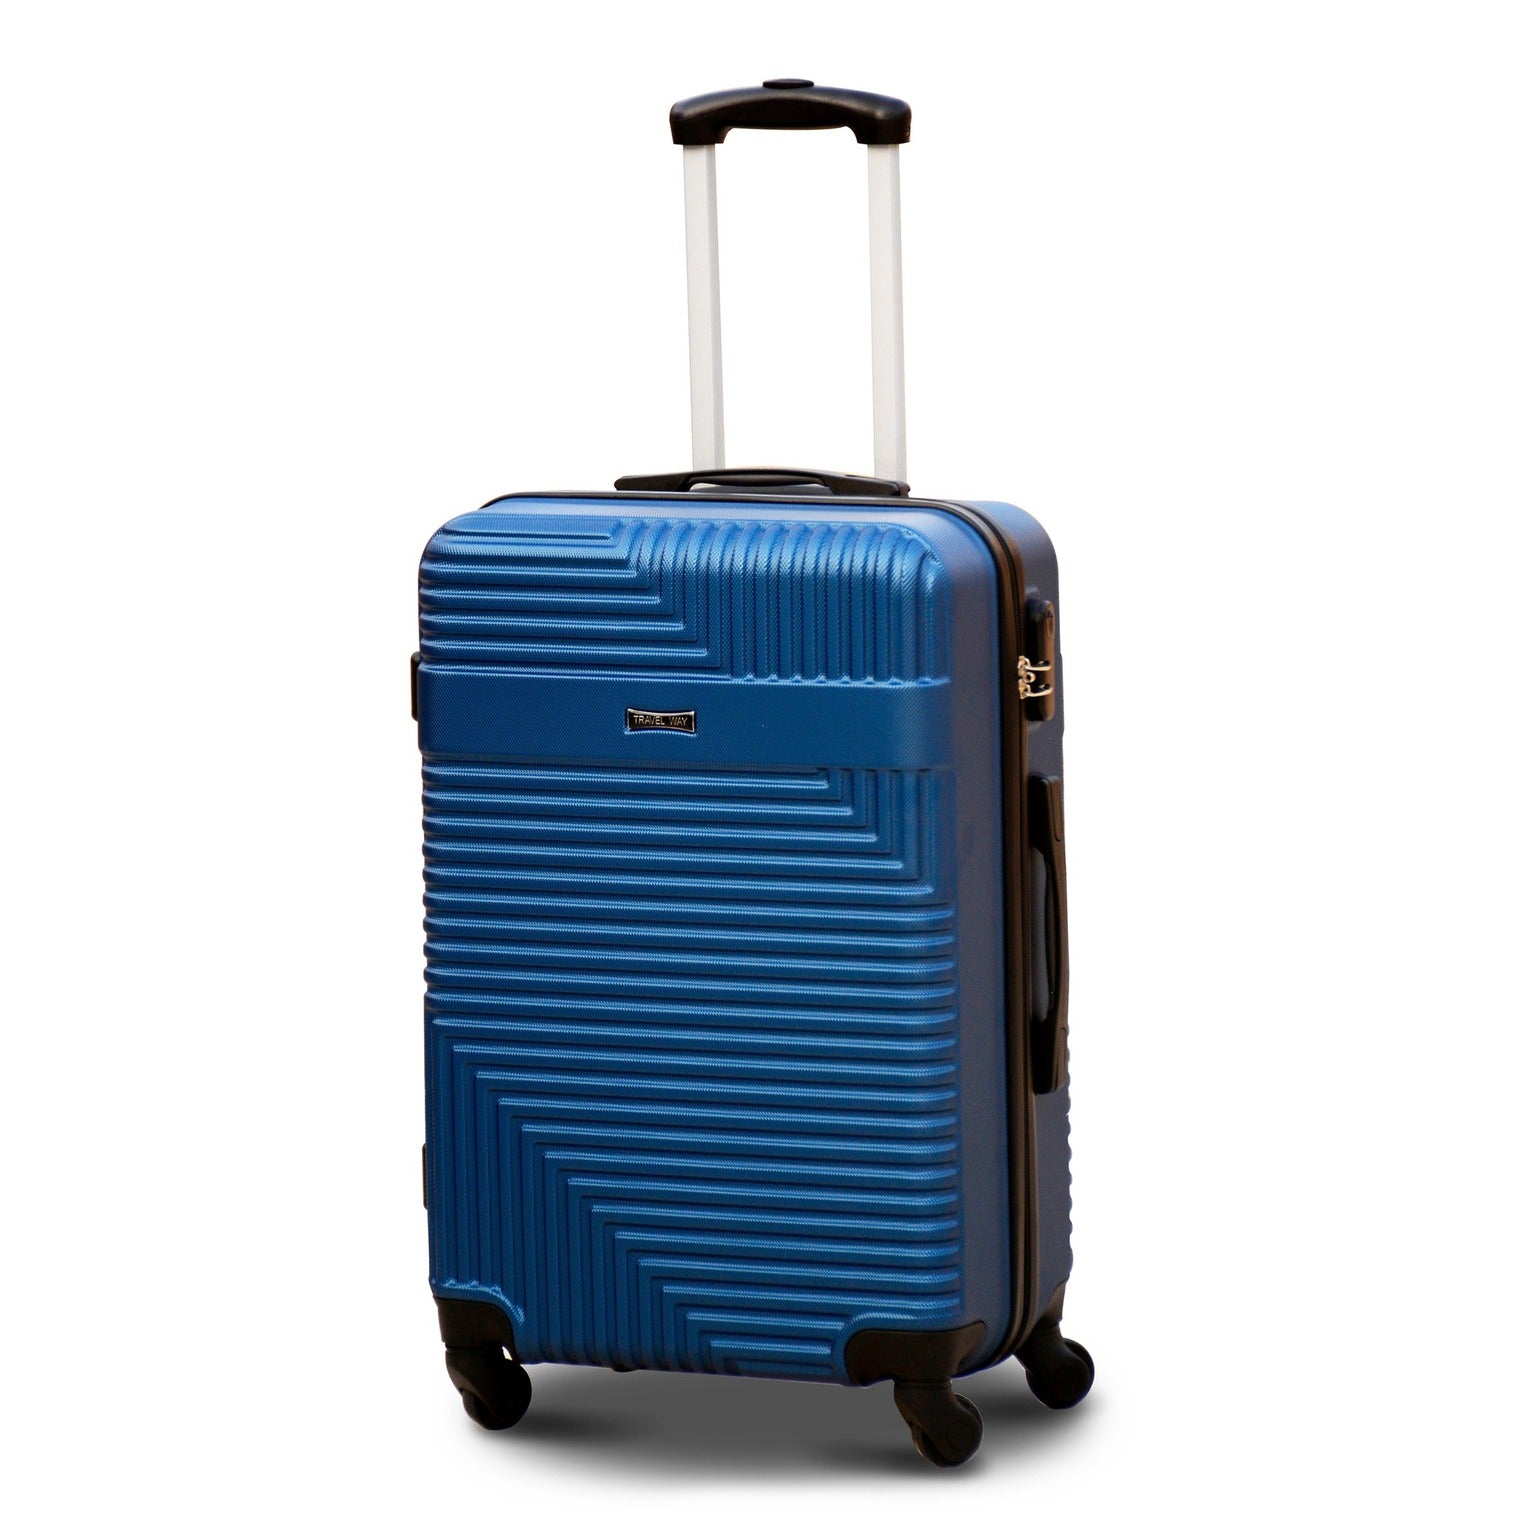 24" Blue Colour Travel Way ABS Luggage Lightweight Hard Case Trolley Bag Zaappy.com